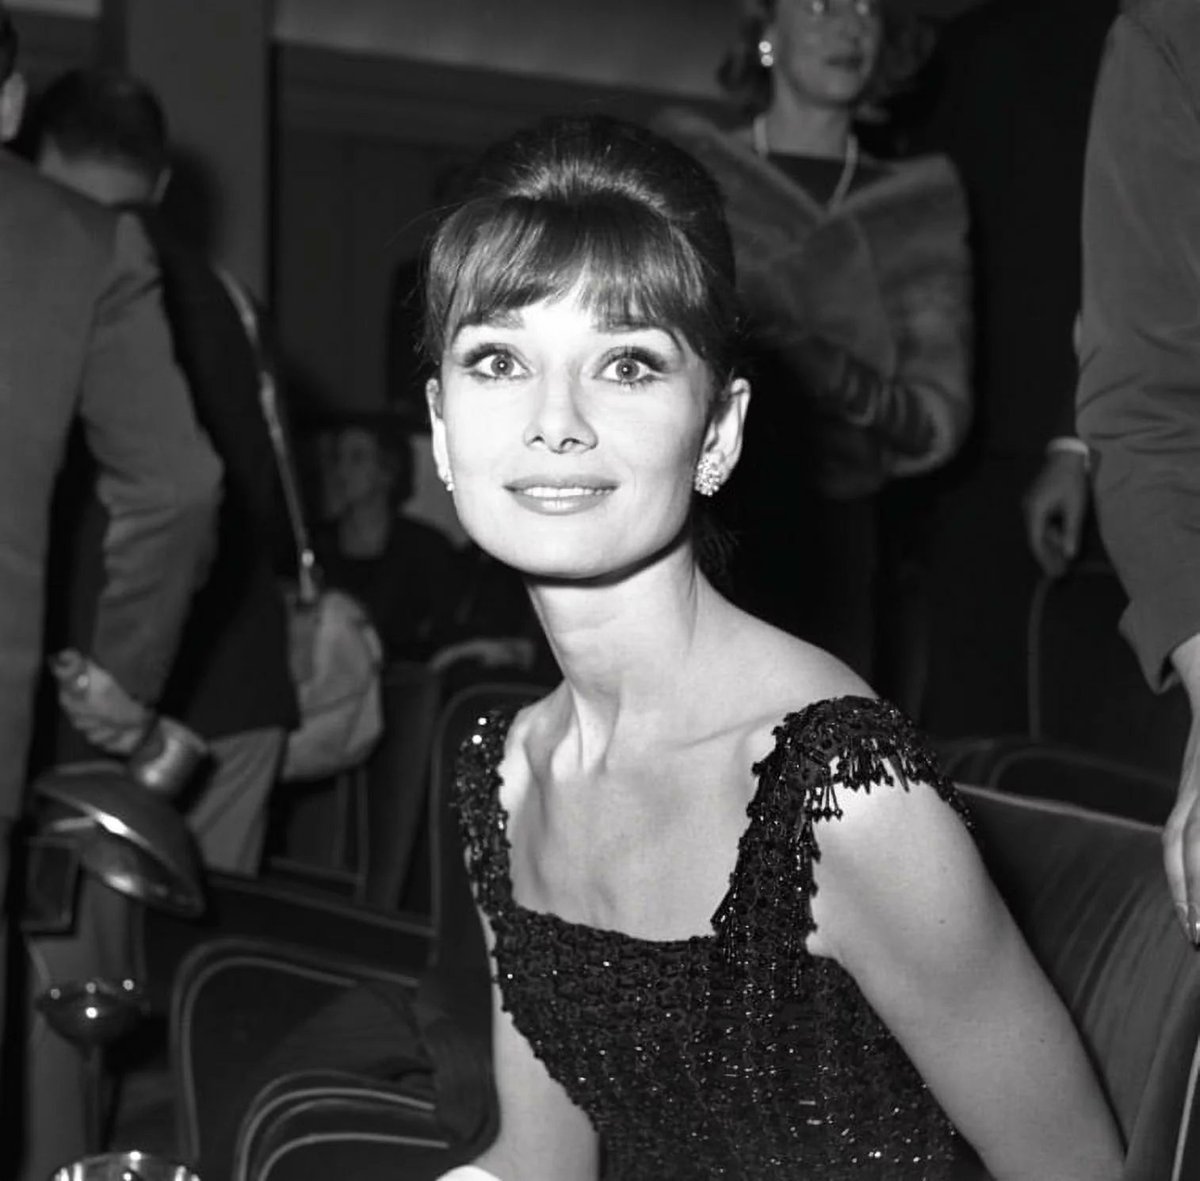 Audrey Hepburn photographed by Elio Sorci at the Cinema Fiammetta in Rome for the premiere of Breakfast at Tiffany’s 1961